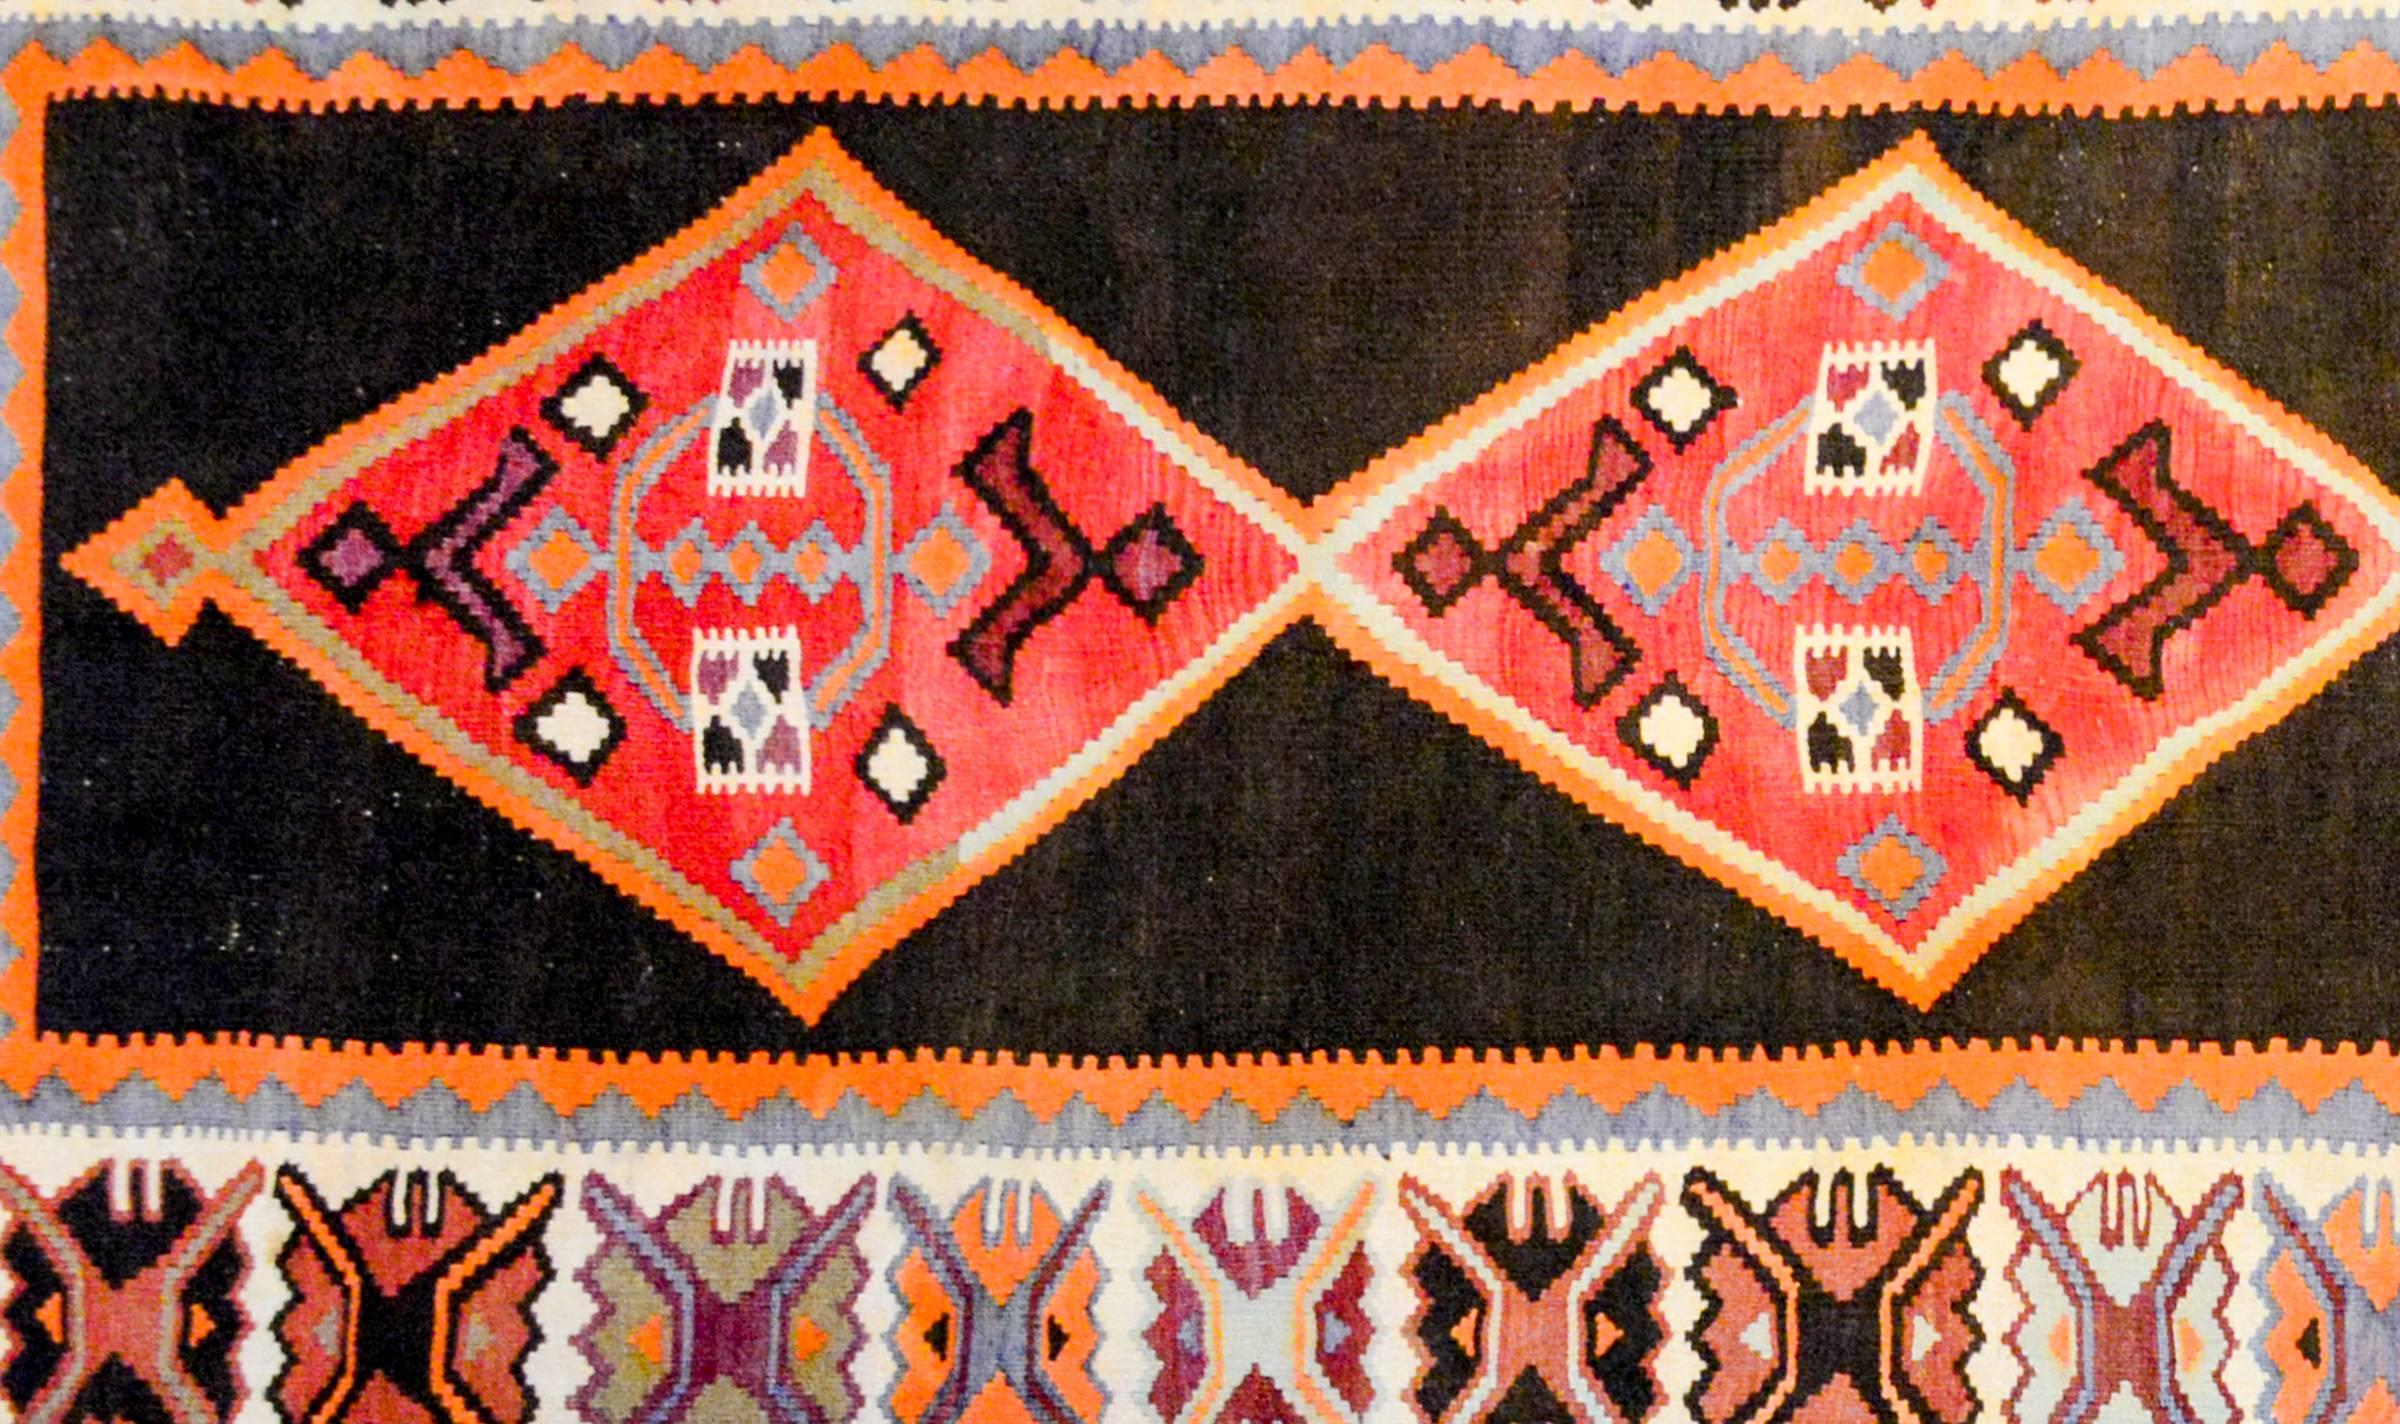 An early 20th century Persian Veramin Kilim runner with five large crimson diamond medallions on a black wool background surrounded by a wide border containing large-scale stylized floral shapes on a white background, with a thin outer border